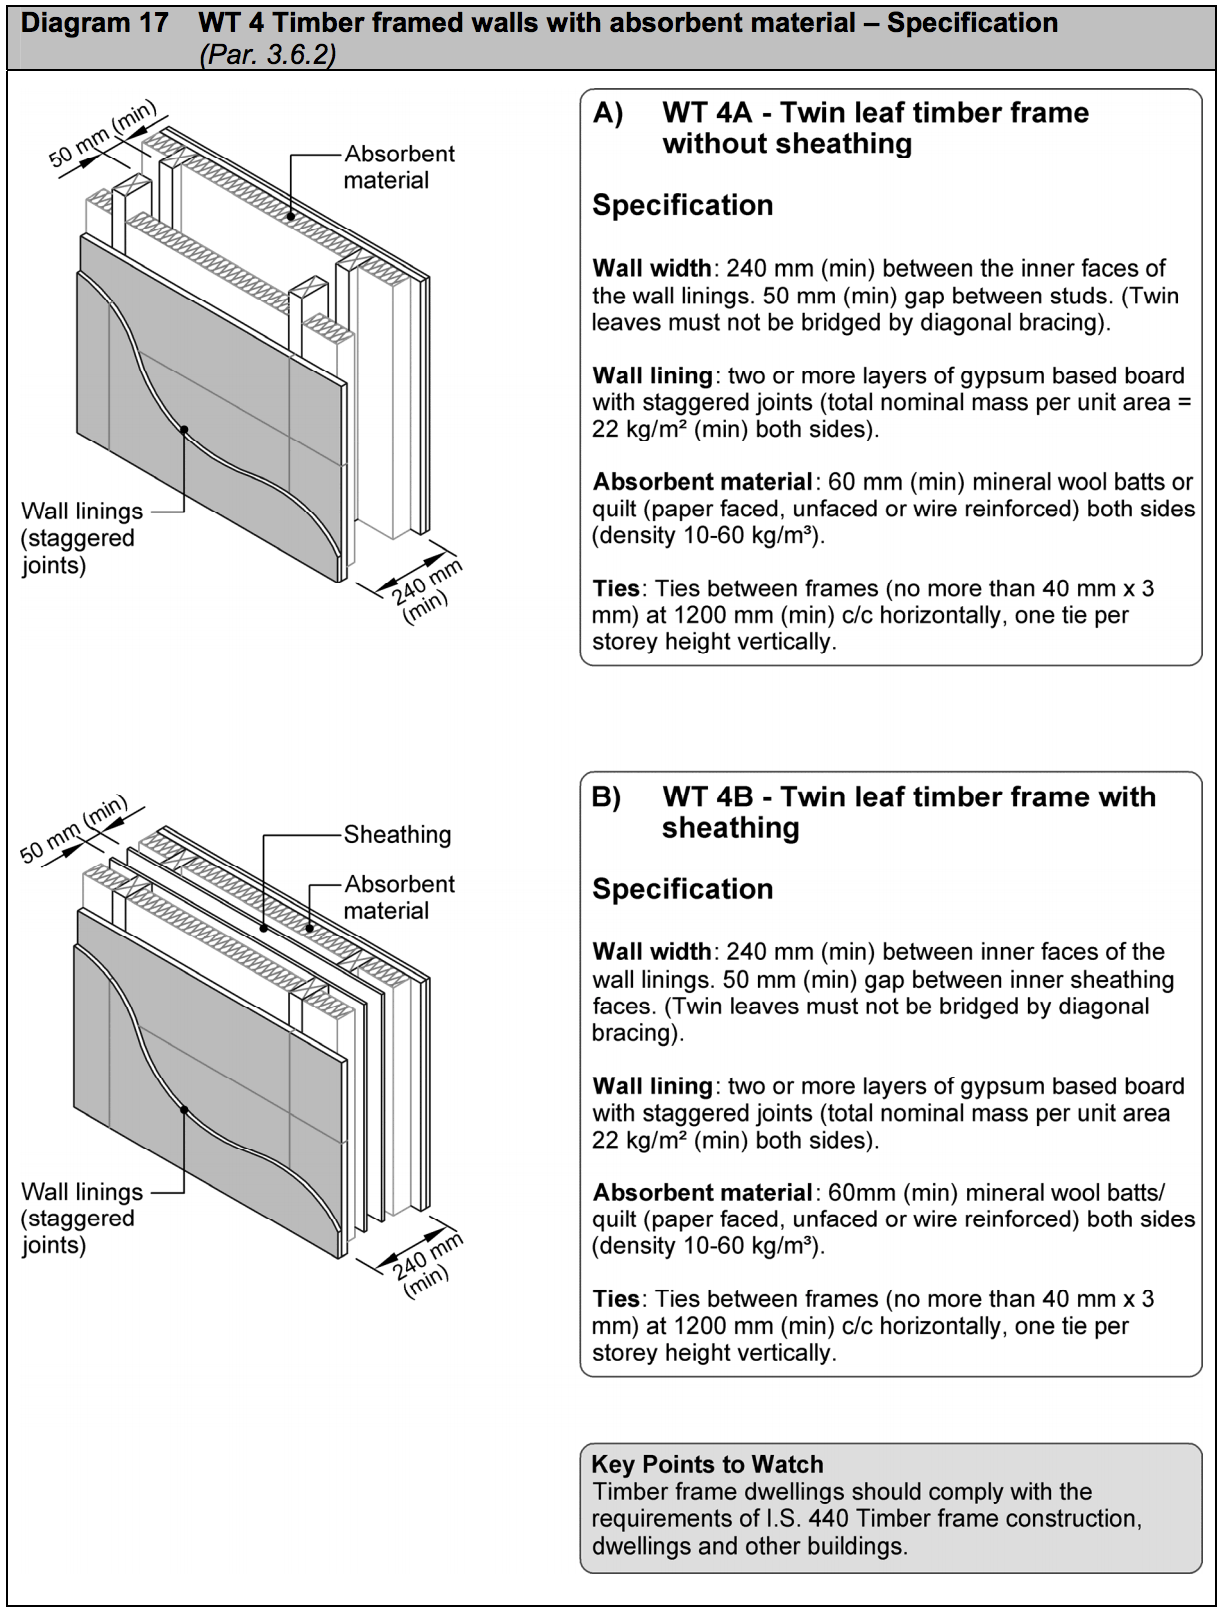 Diagram HE17 - WT 4 Timber framed walls with absorbent material - specification - Extract from TGD E